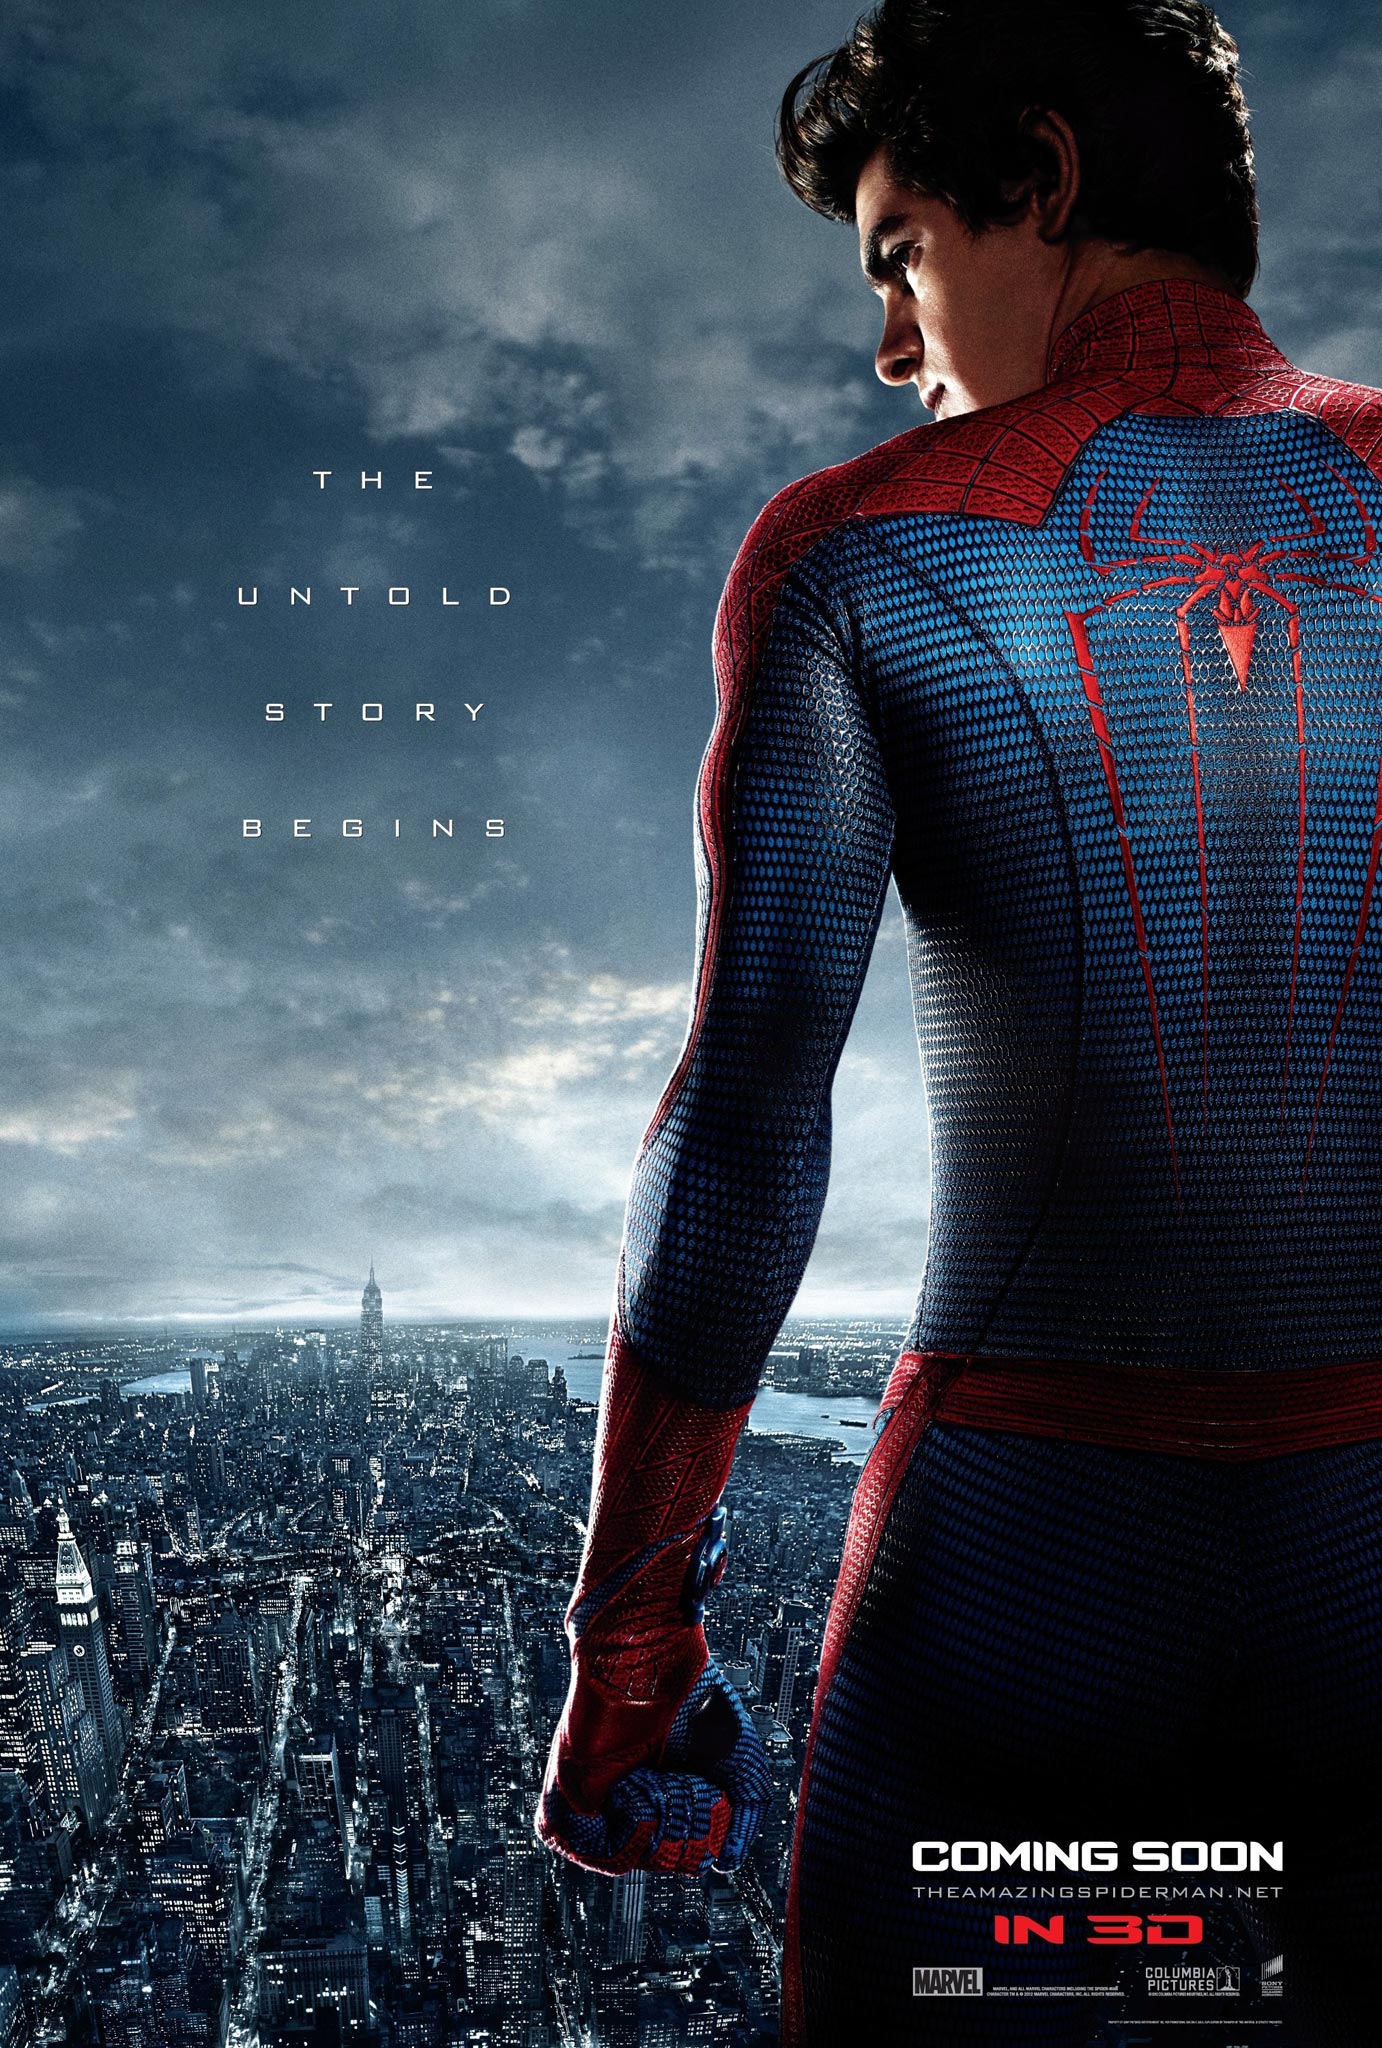 THE AMAZING SPIDER-MAN Poster